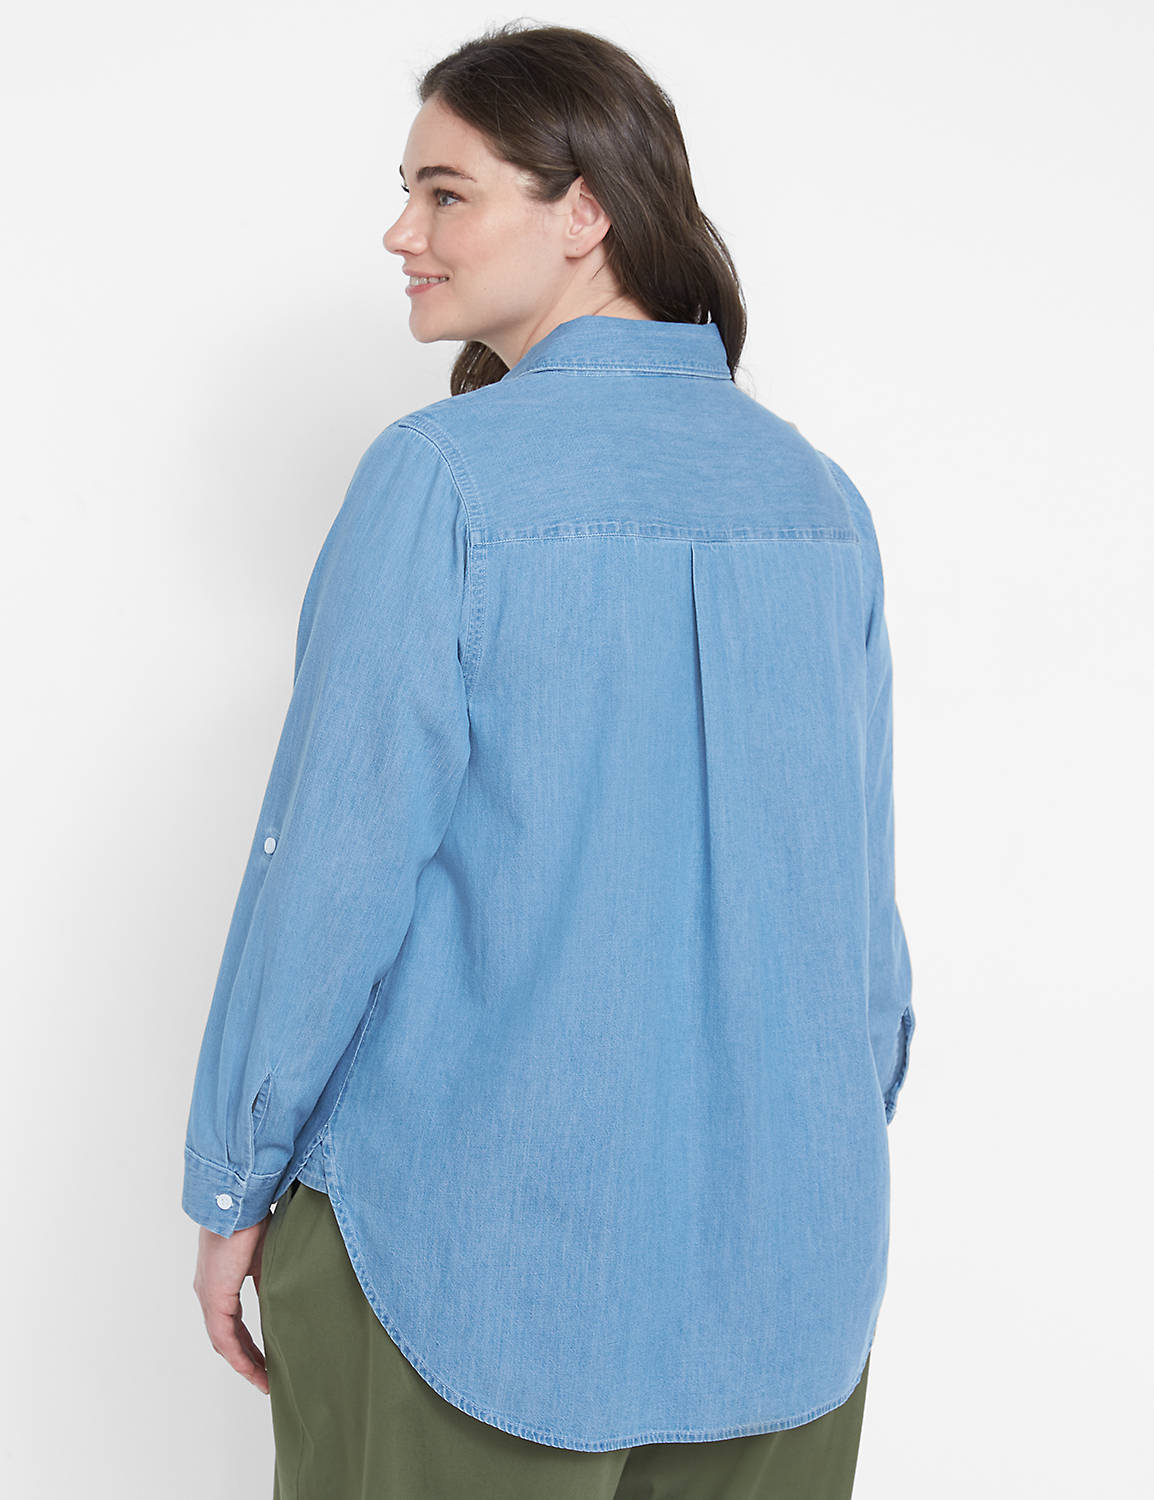 Long Sleeve Button Front Chambray S Product Image 2